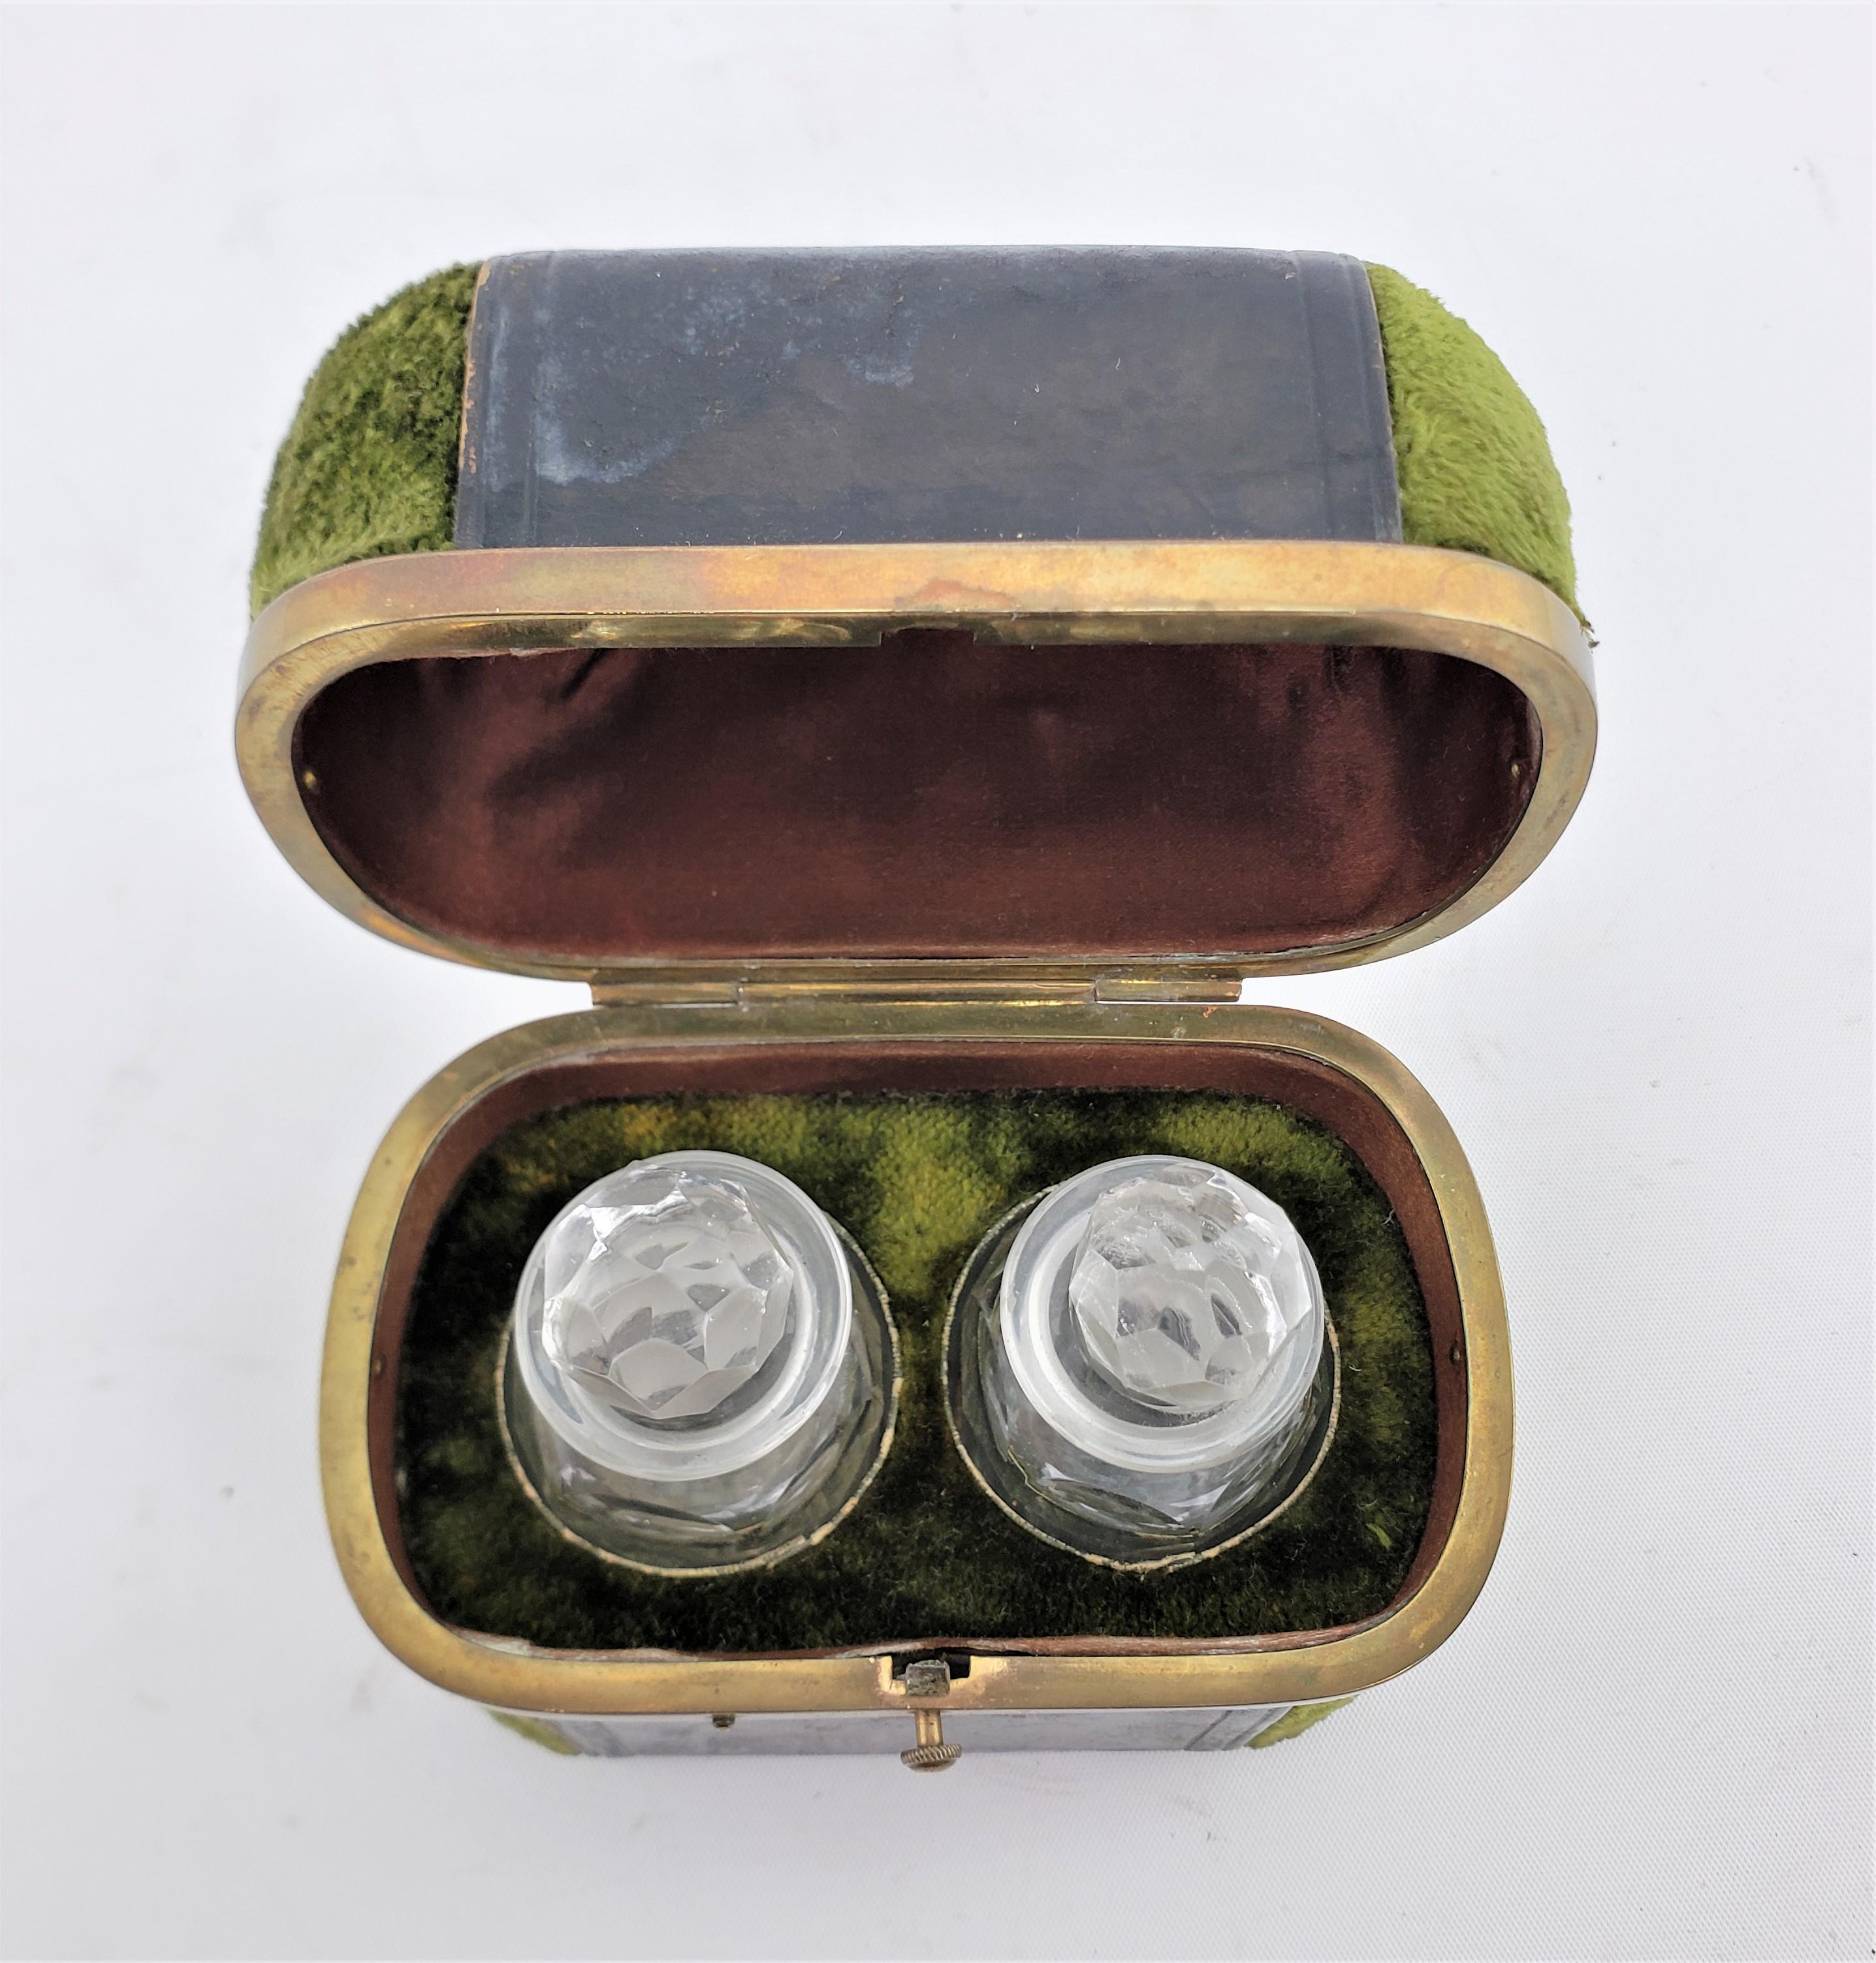 Pair of Antique French Clear Glass Scent or Perfume Bottles with a Fitted Case In Good Condition For Sale In Hamilton, Ontario